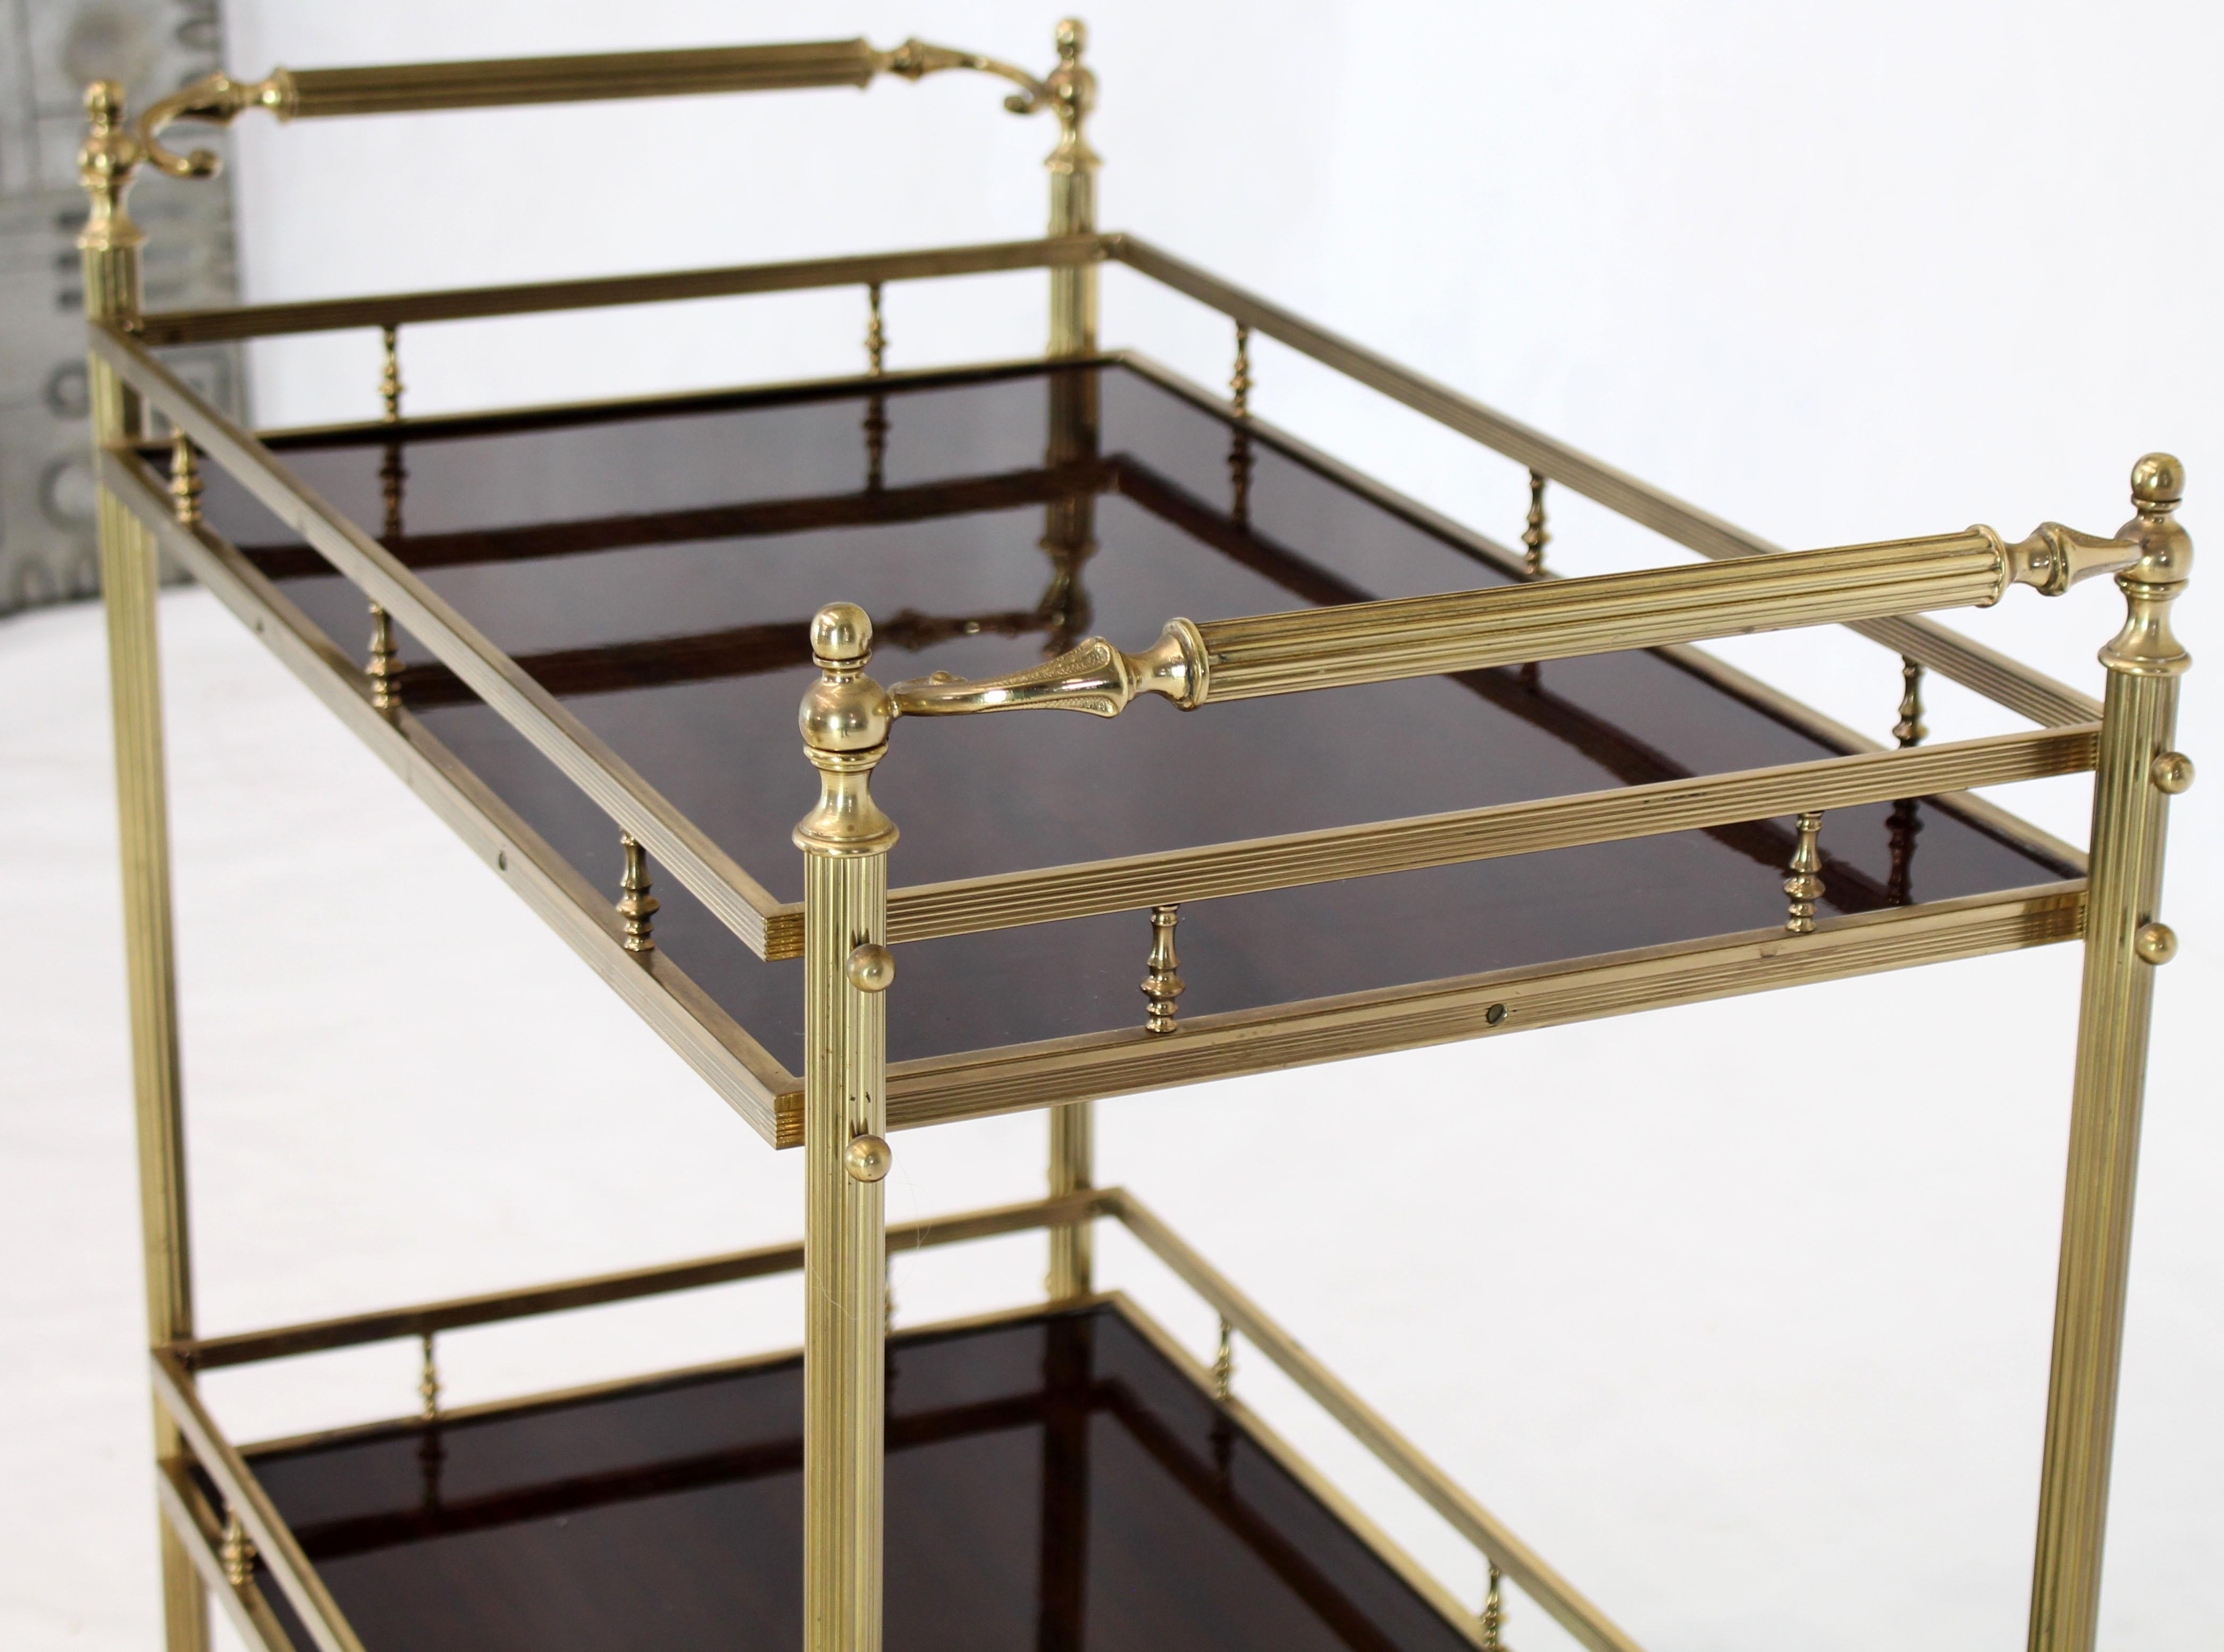 Fine solid brass and mahogany double handled serving car table. Nice brass gallery around the perimeters of the both levels. Aldo Tura details and mahogany panels finish quality.